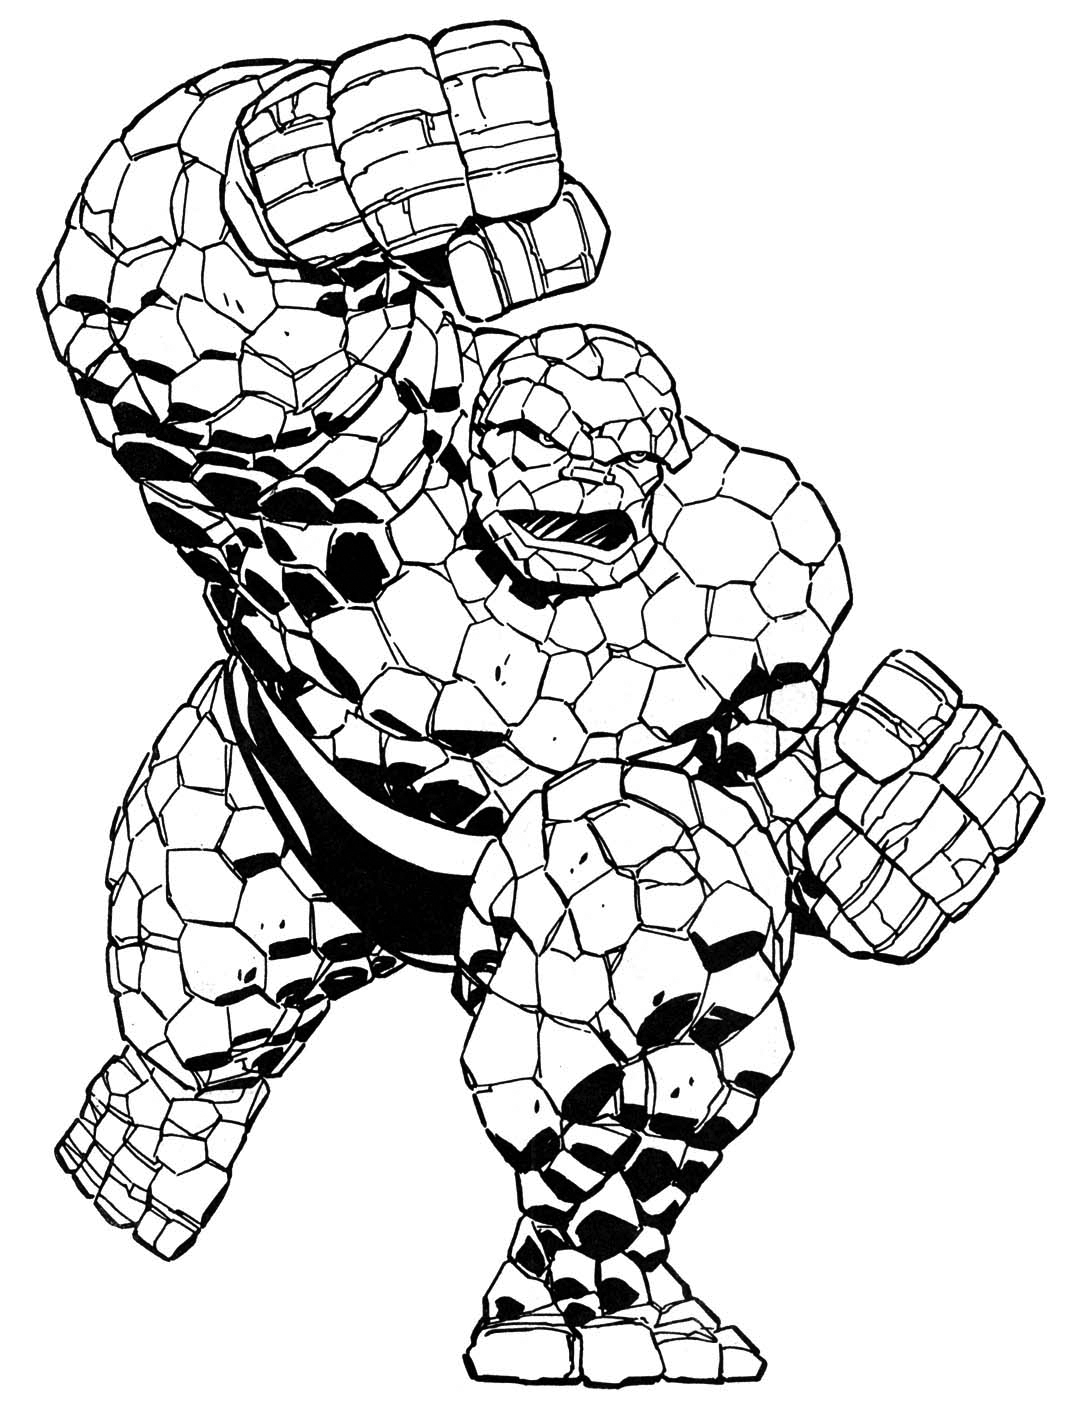 super heroes colouring pictures superhero coloring pages best coloring pages for kids heroes colouring super pictures 